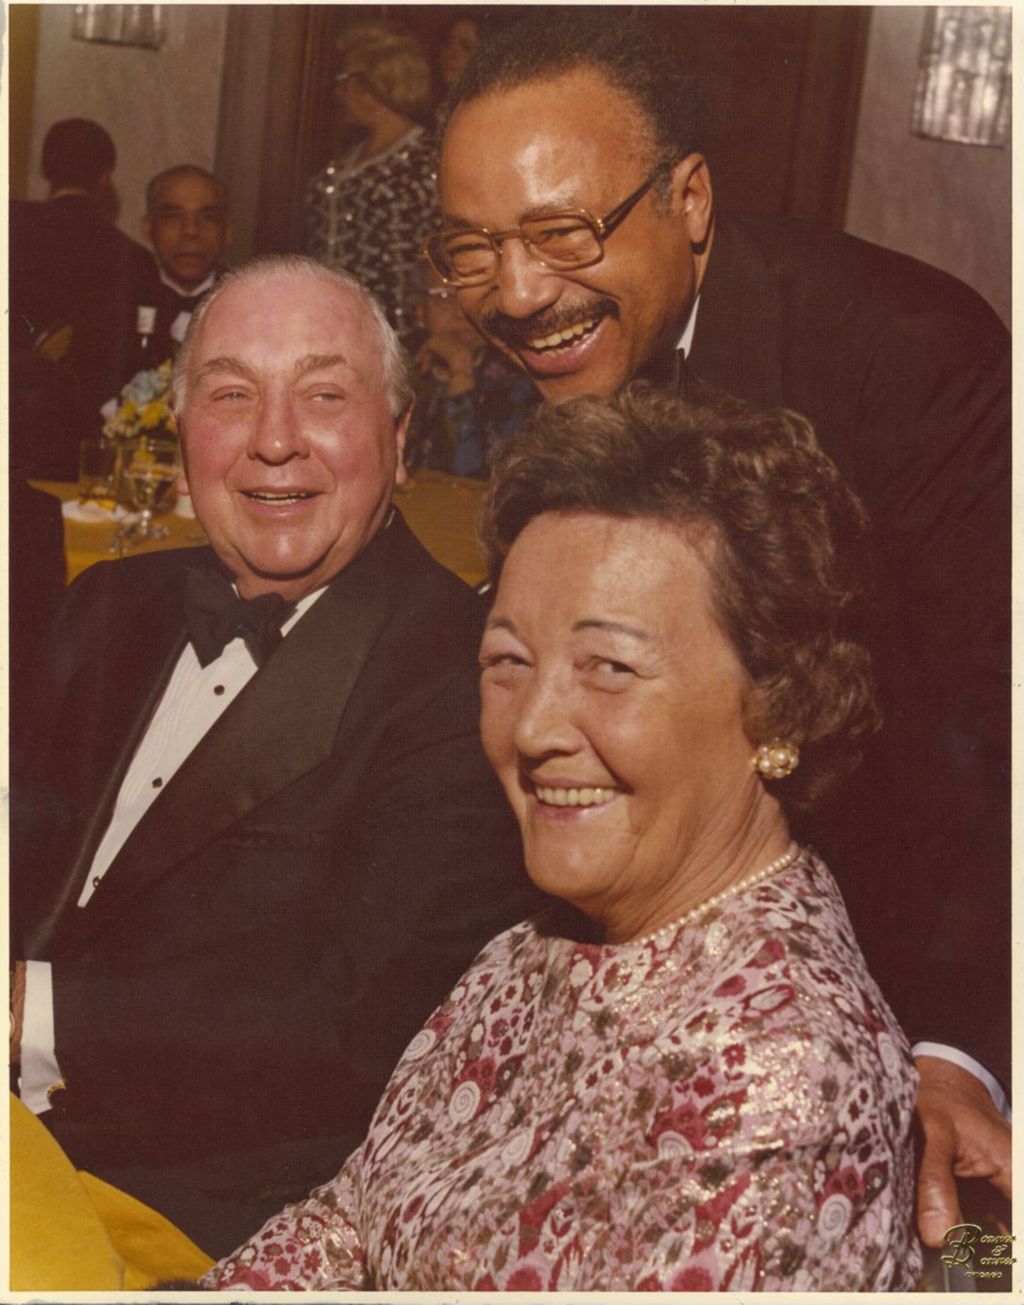 Miniature of Richard J. and Eleanor Daley with Roland Burris